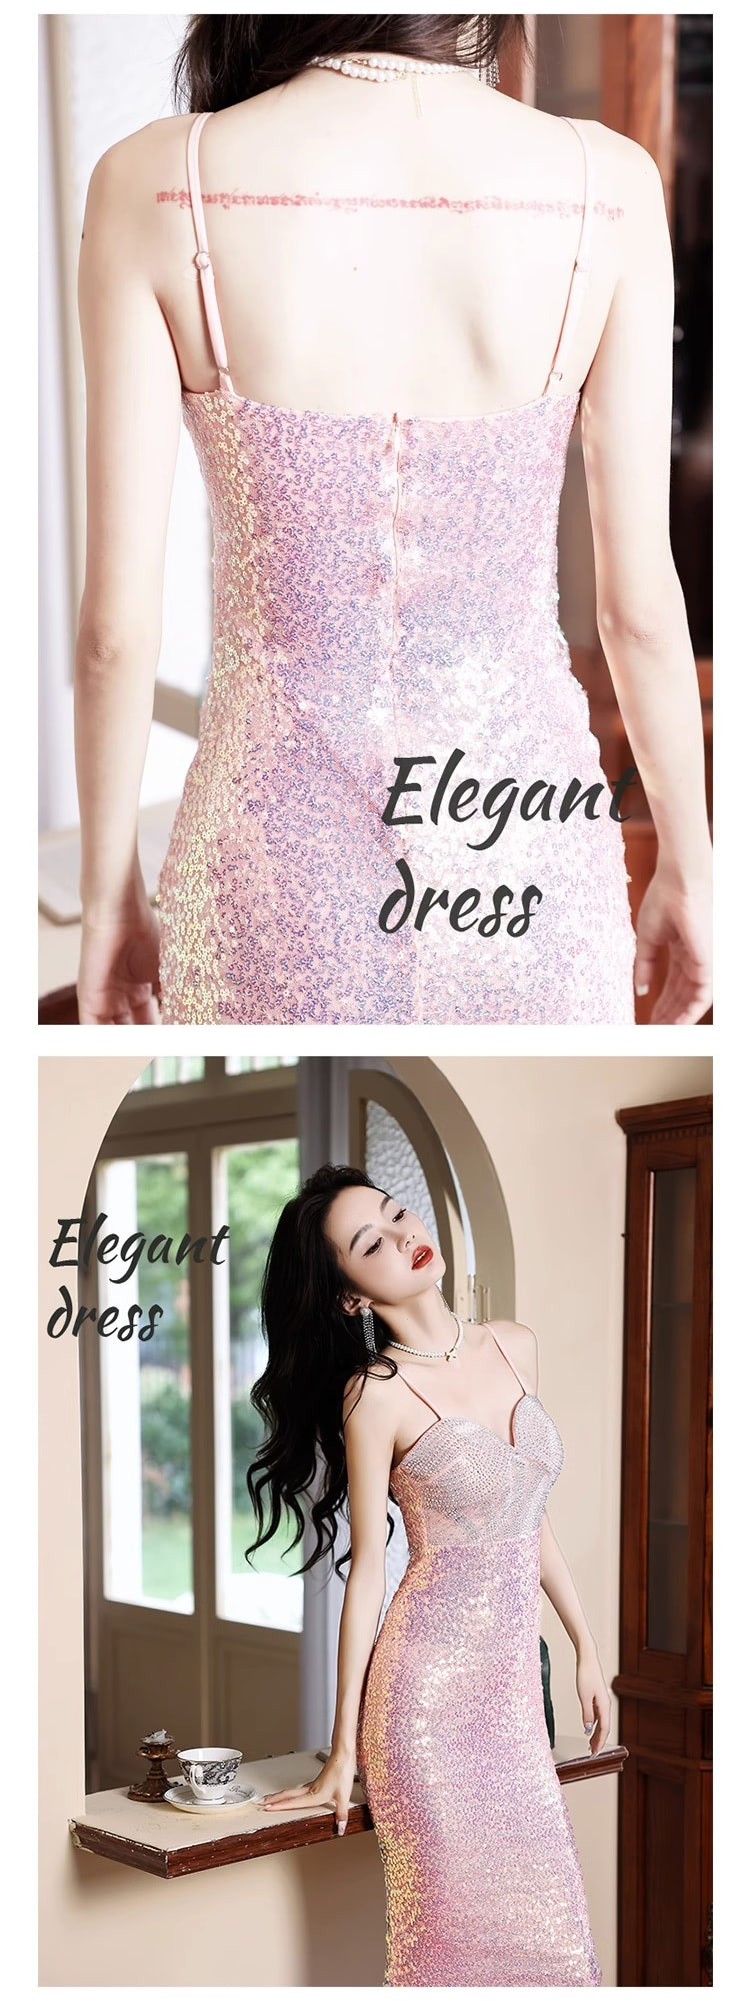 Luxury-Pink-Sequin-Fishtail-Prom-Dress-Charming-Sparkly-Evening-Gown11